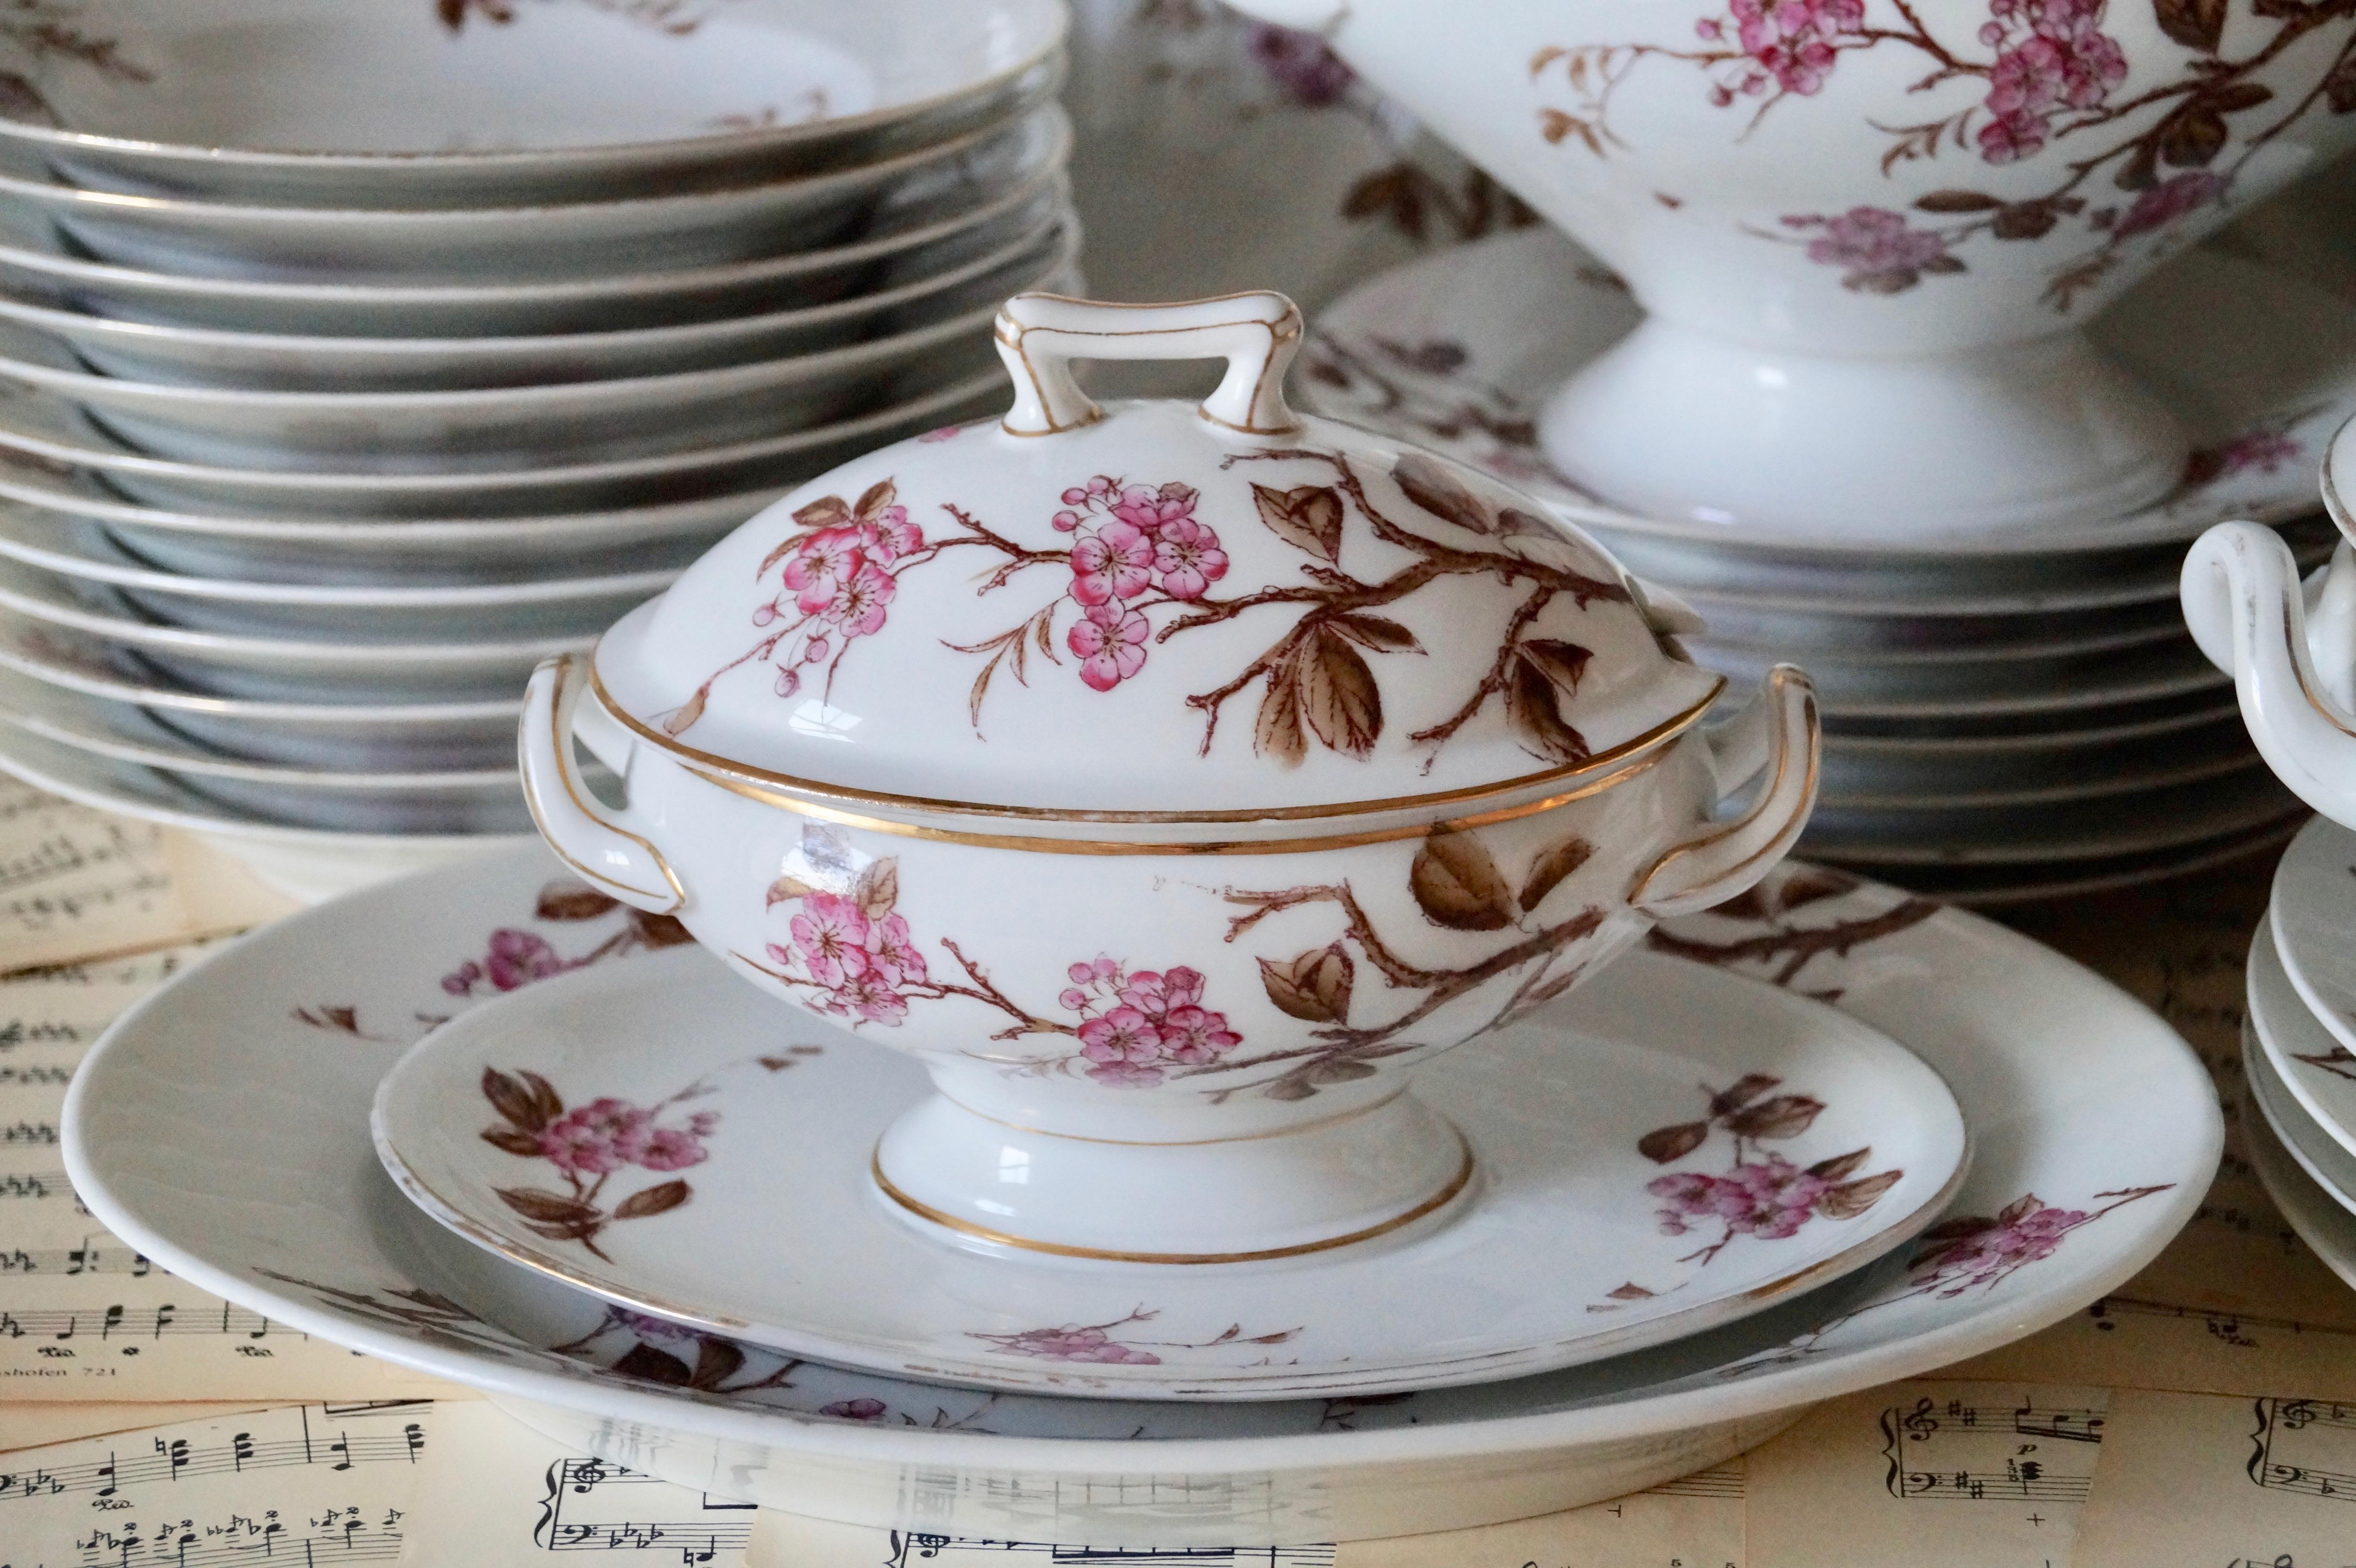 Gorgeous antique French porcelain Old Paris dinnerware for 12!.

Beautiful handpainted pattern with pink blossoms and branch. finished with gold decorations.

Good condition, there are gold wear at the edge of the plates and tureens. The lid of